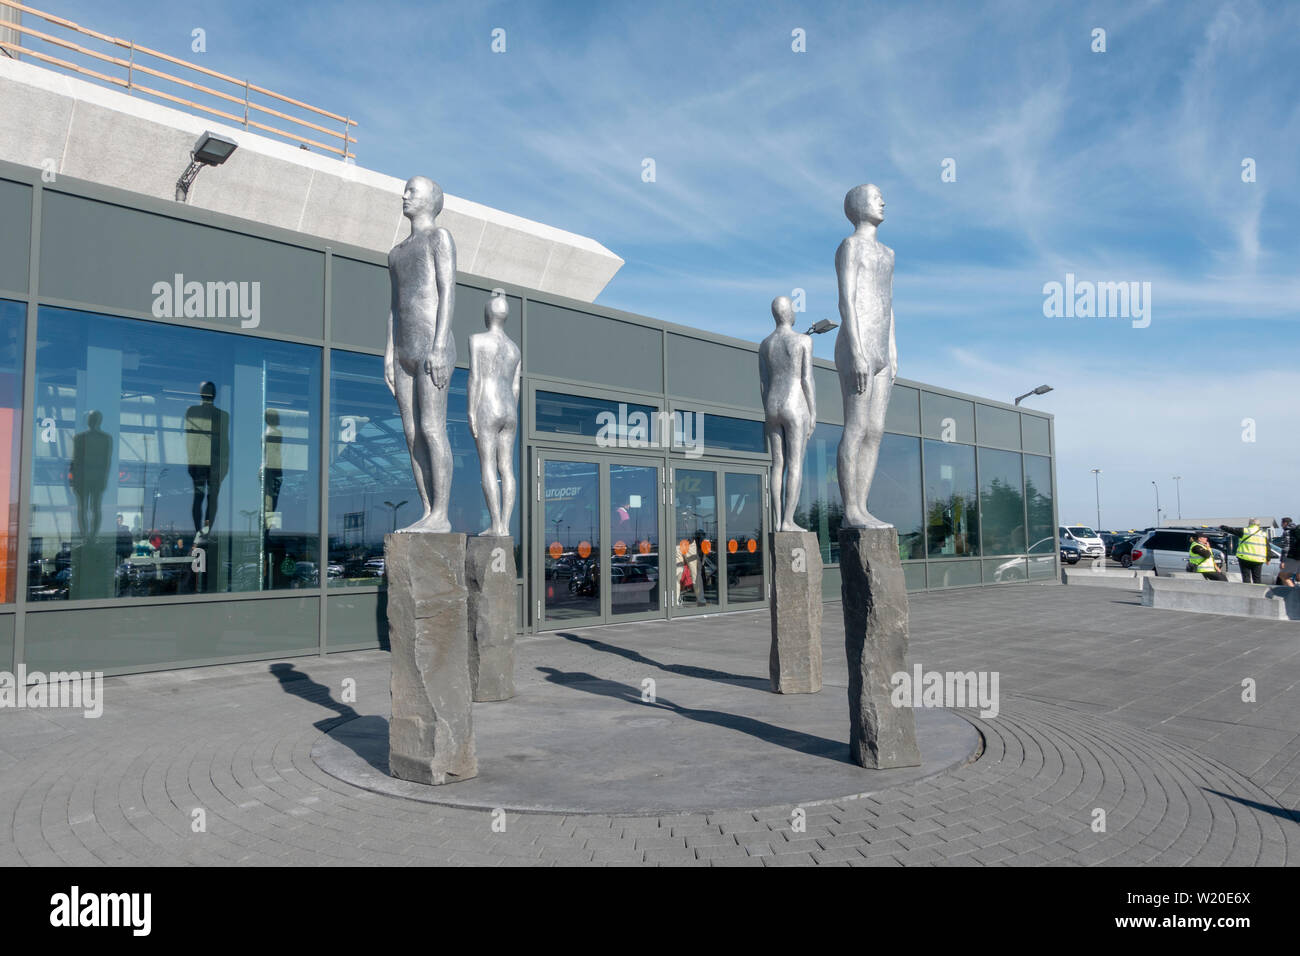 Sculpture ('Directions') outside the arrivals exit at Keflavík International Airport, near Reykjavik, Iceland. Stock Photo